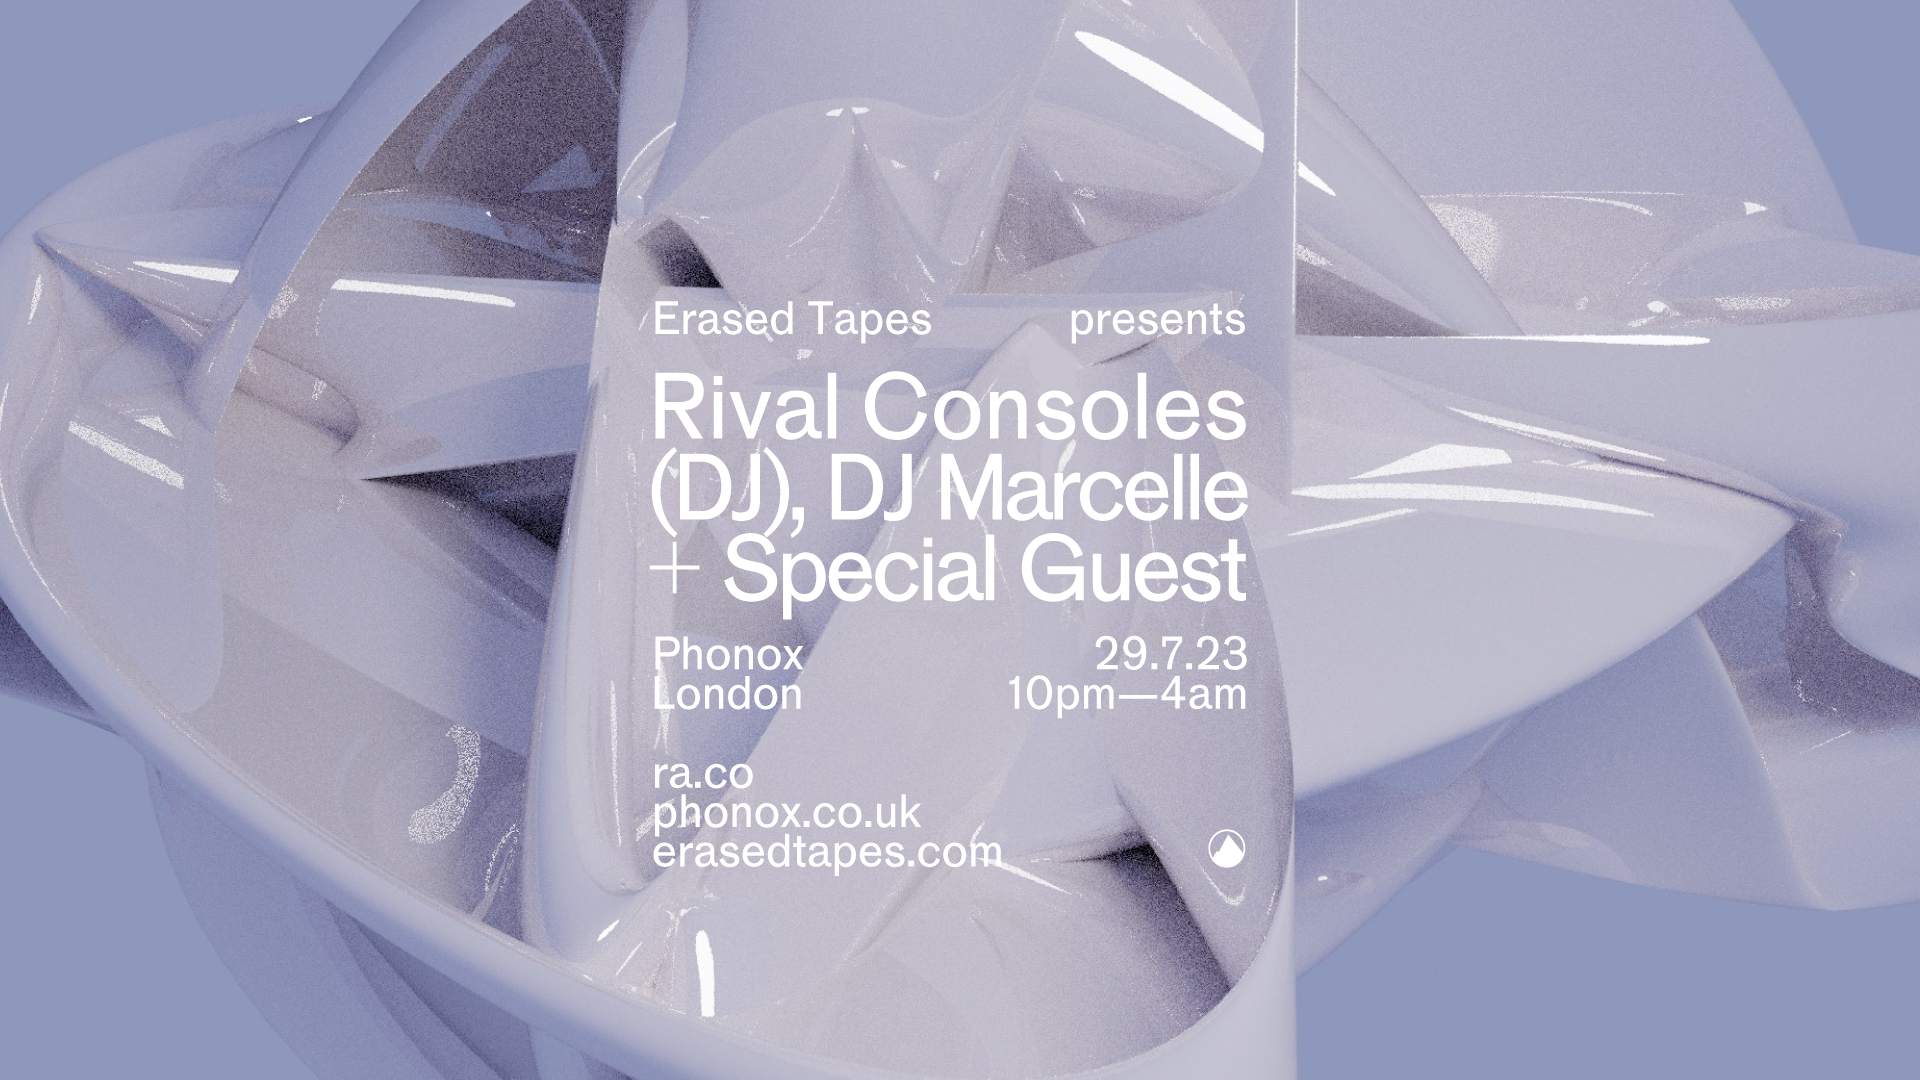 Erased Tapes presents: Rival Consoles (DJ), DJ Marcelle, Special Guest TBA - Página frontal